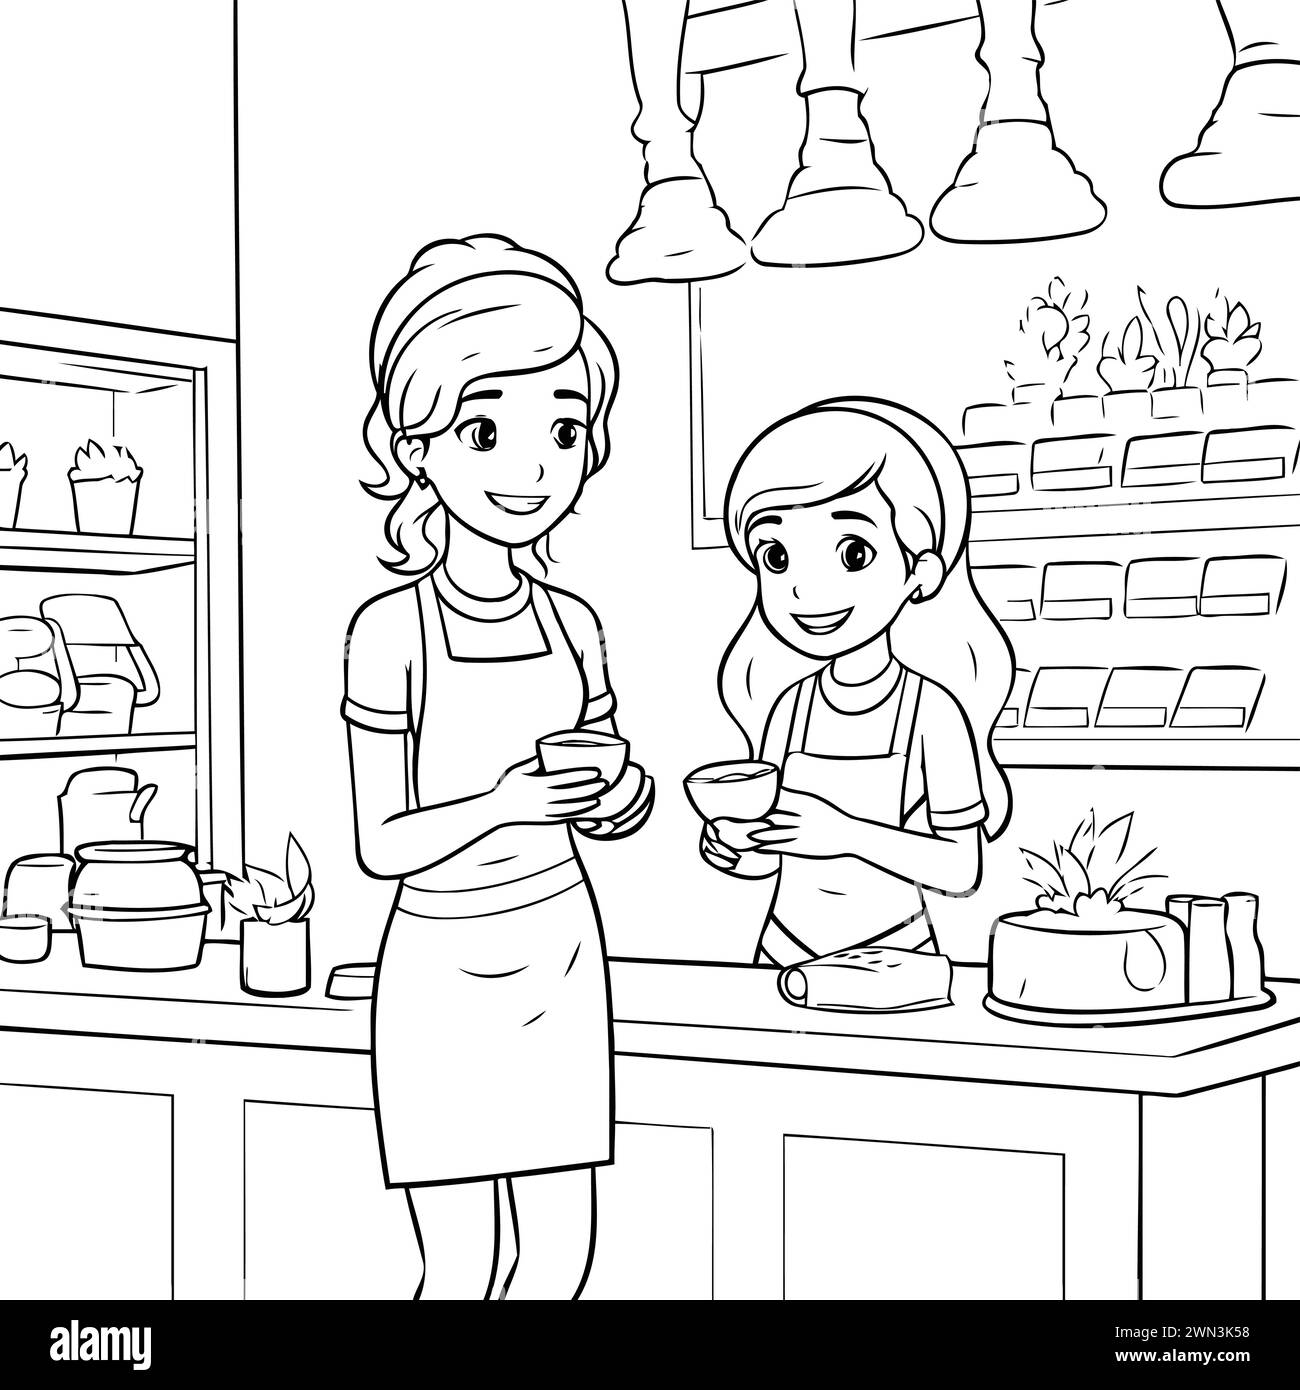 Coloring Page Outline Of Mother and Daughter Cooking Food In Kitchen Stock Vector